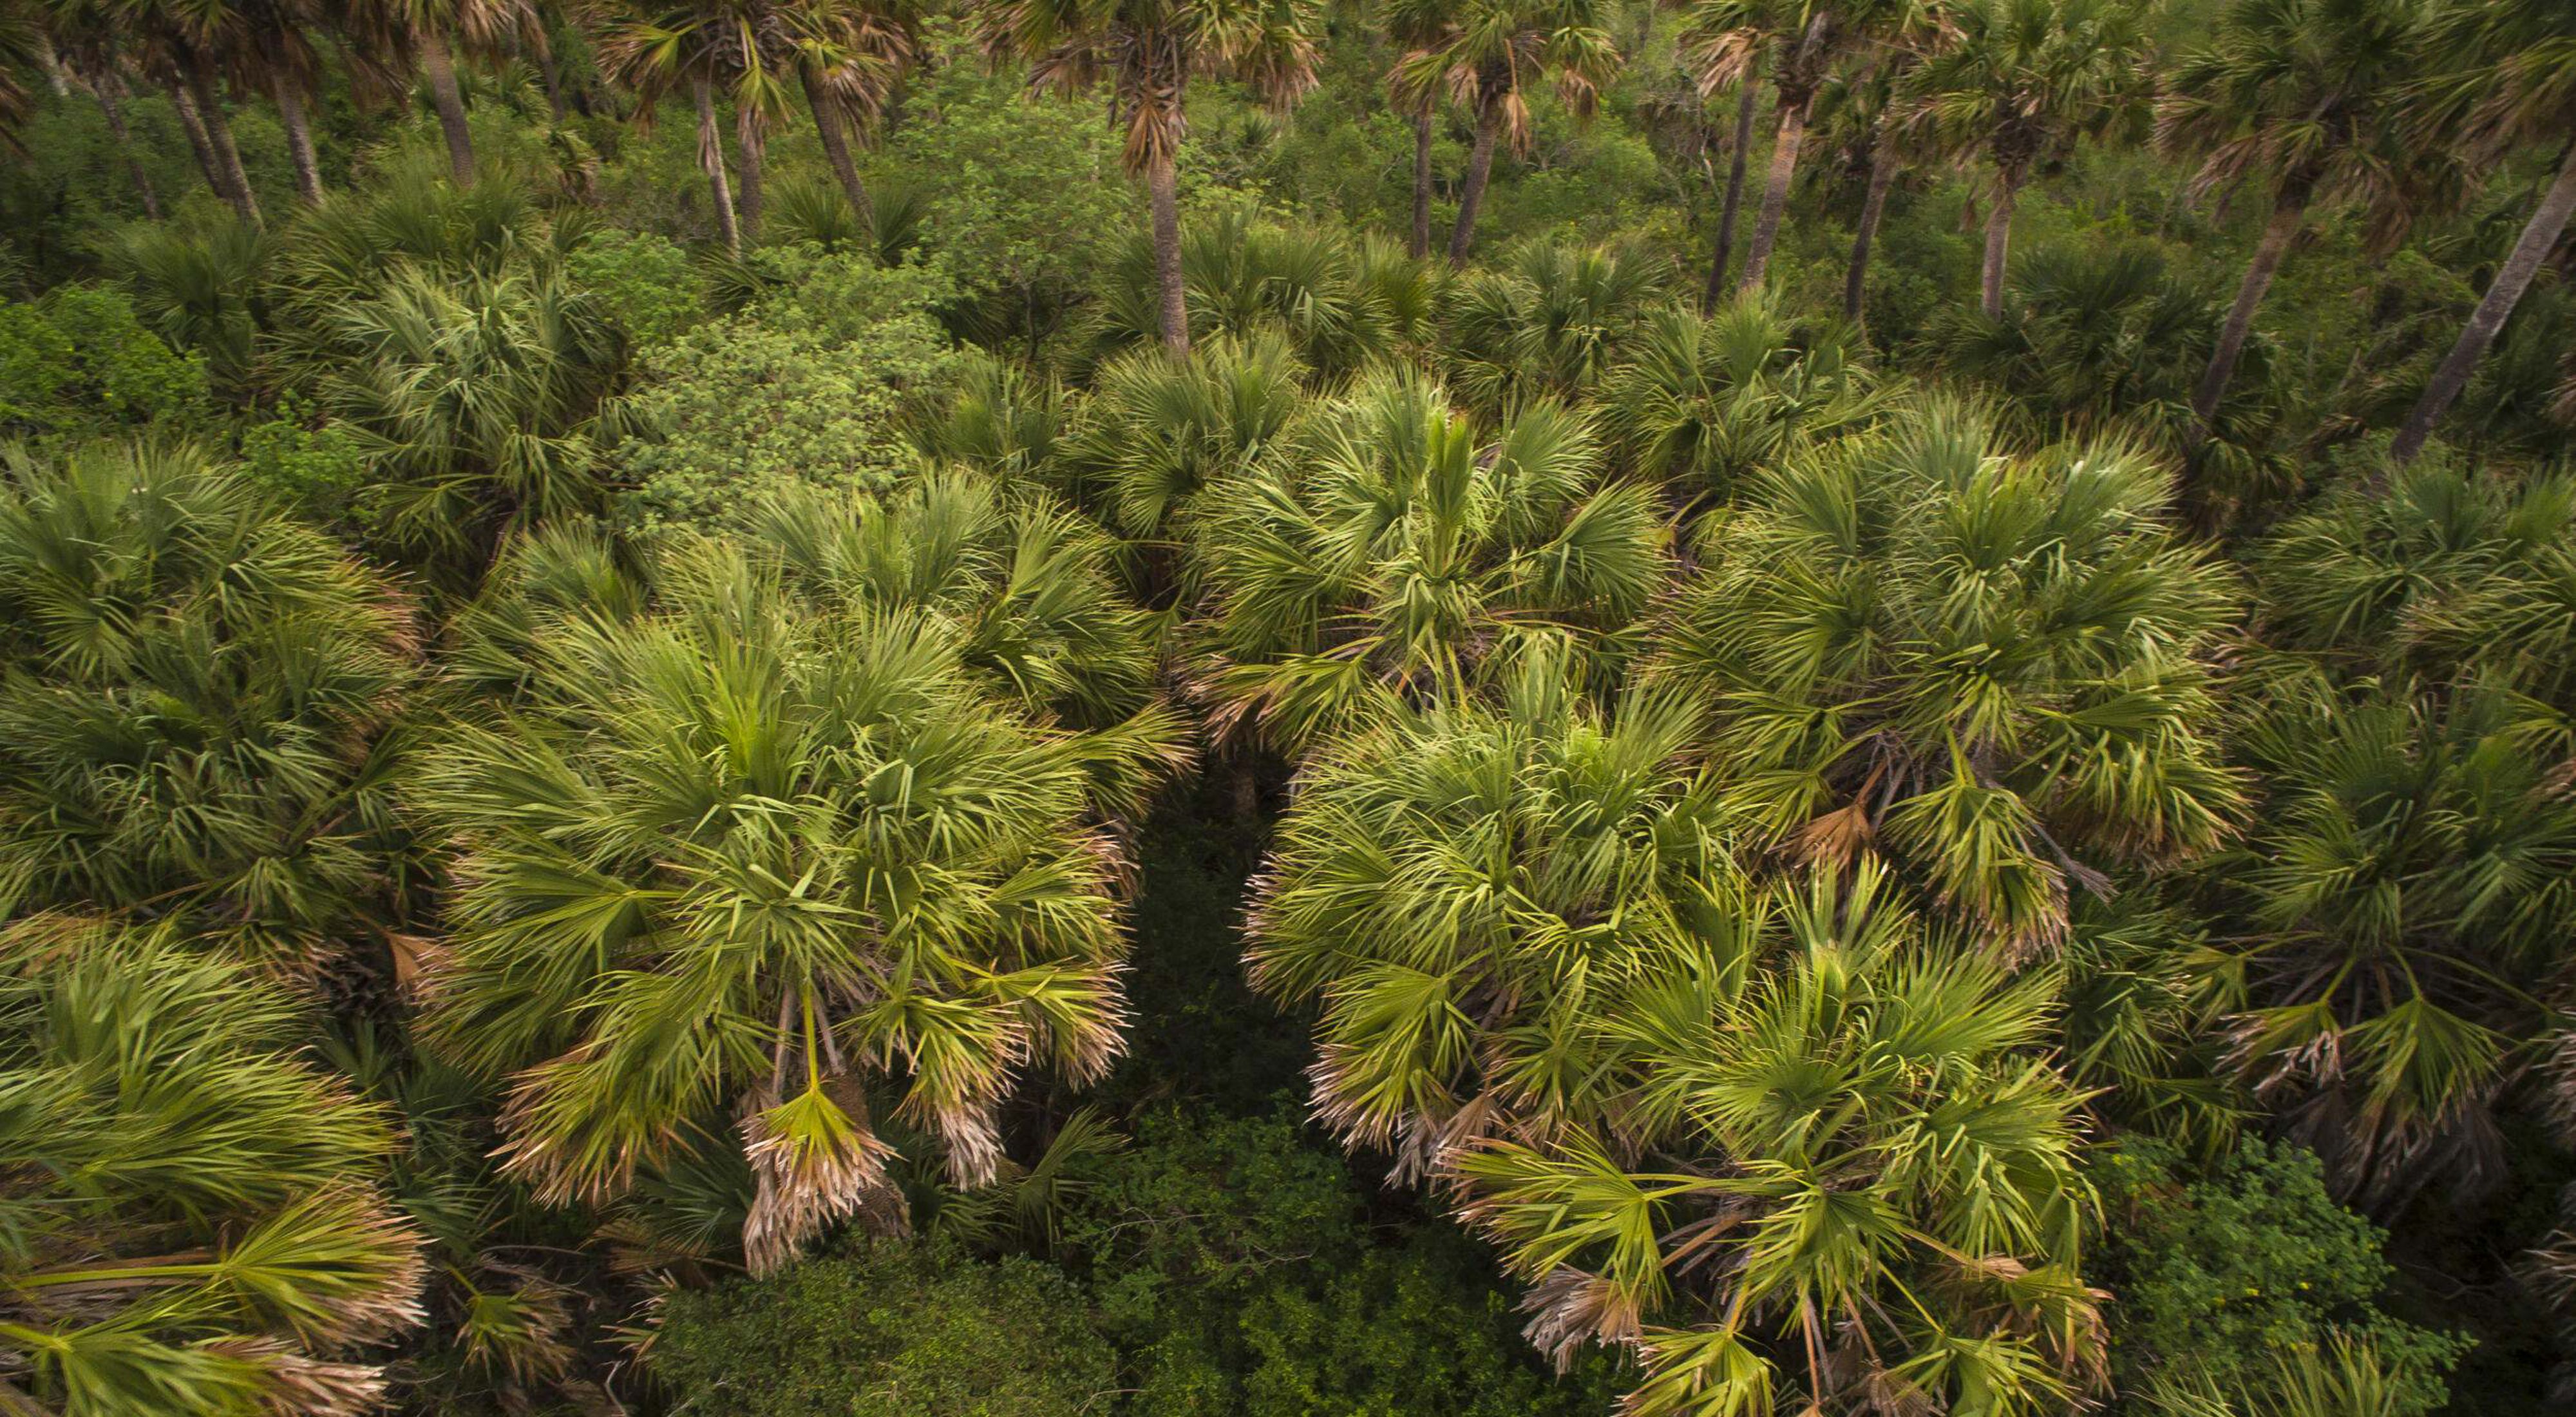 A field of green palm trees.